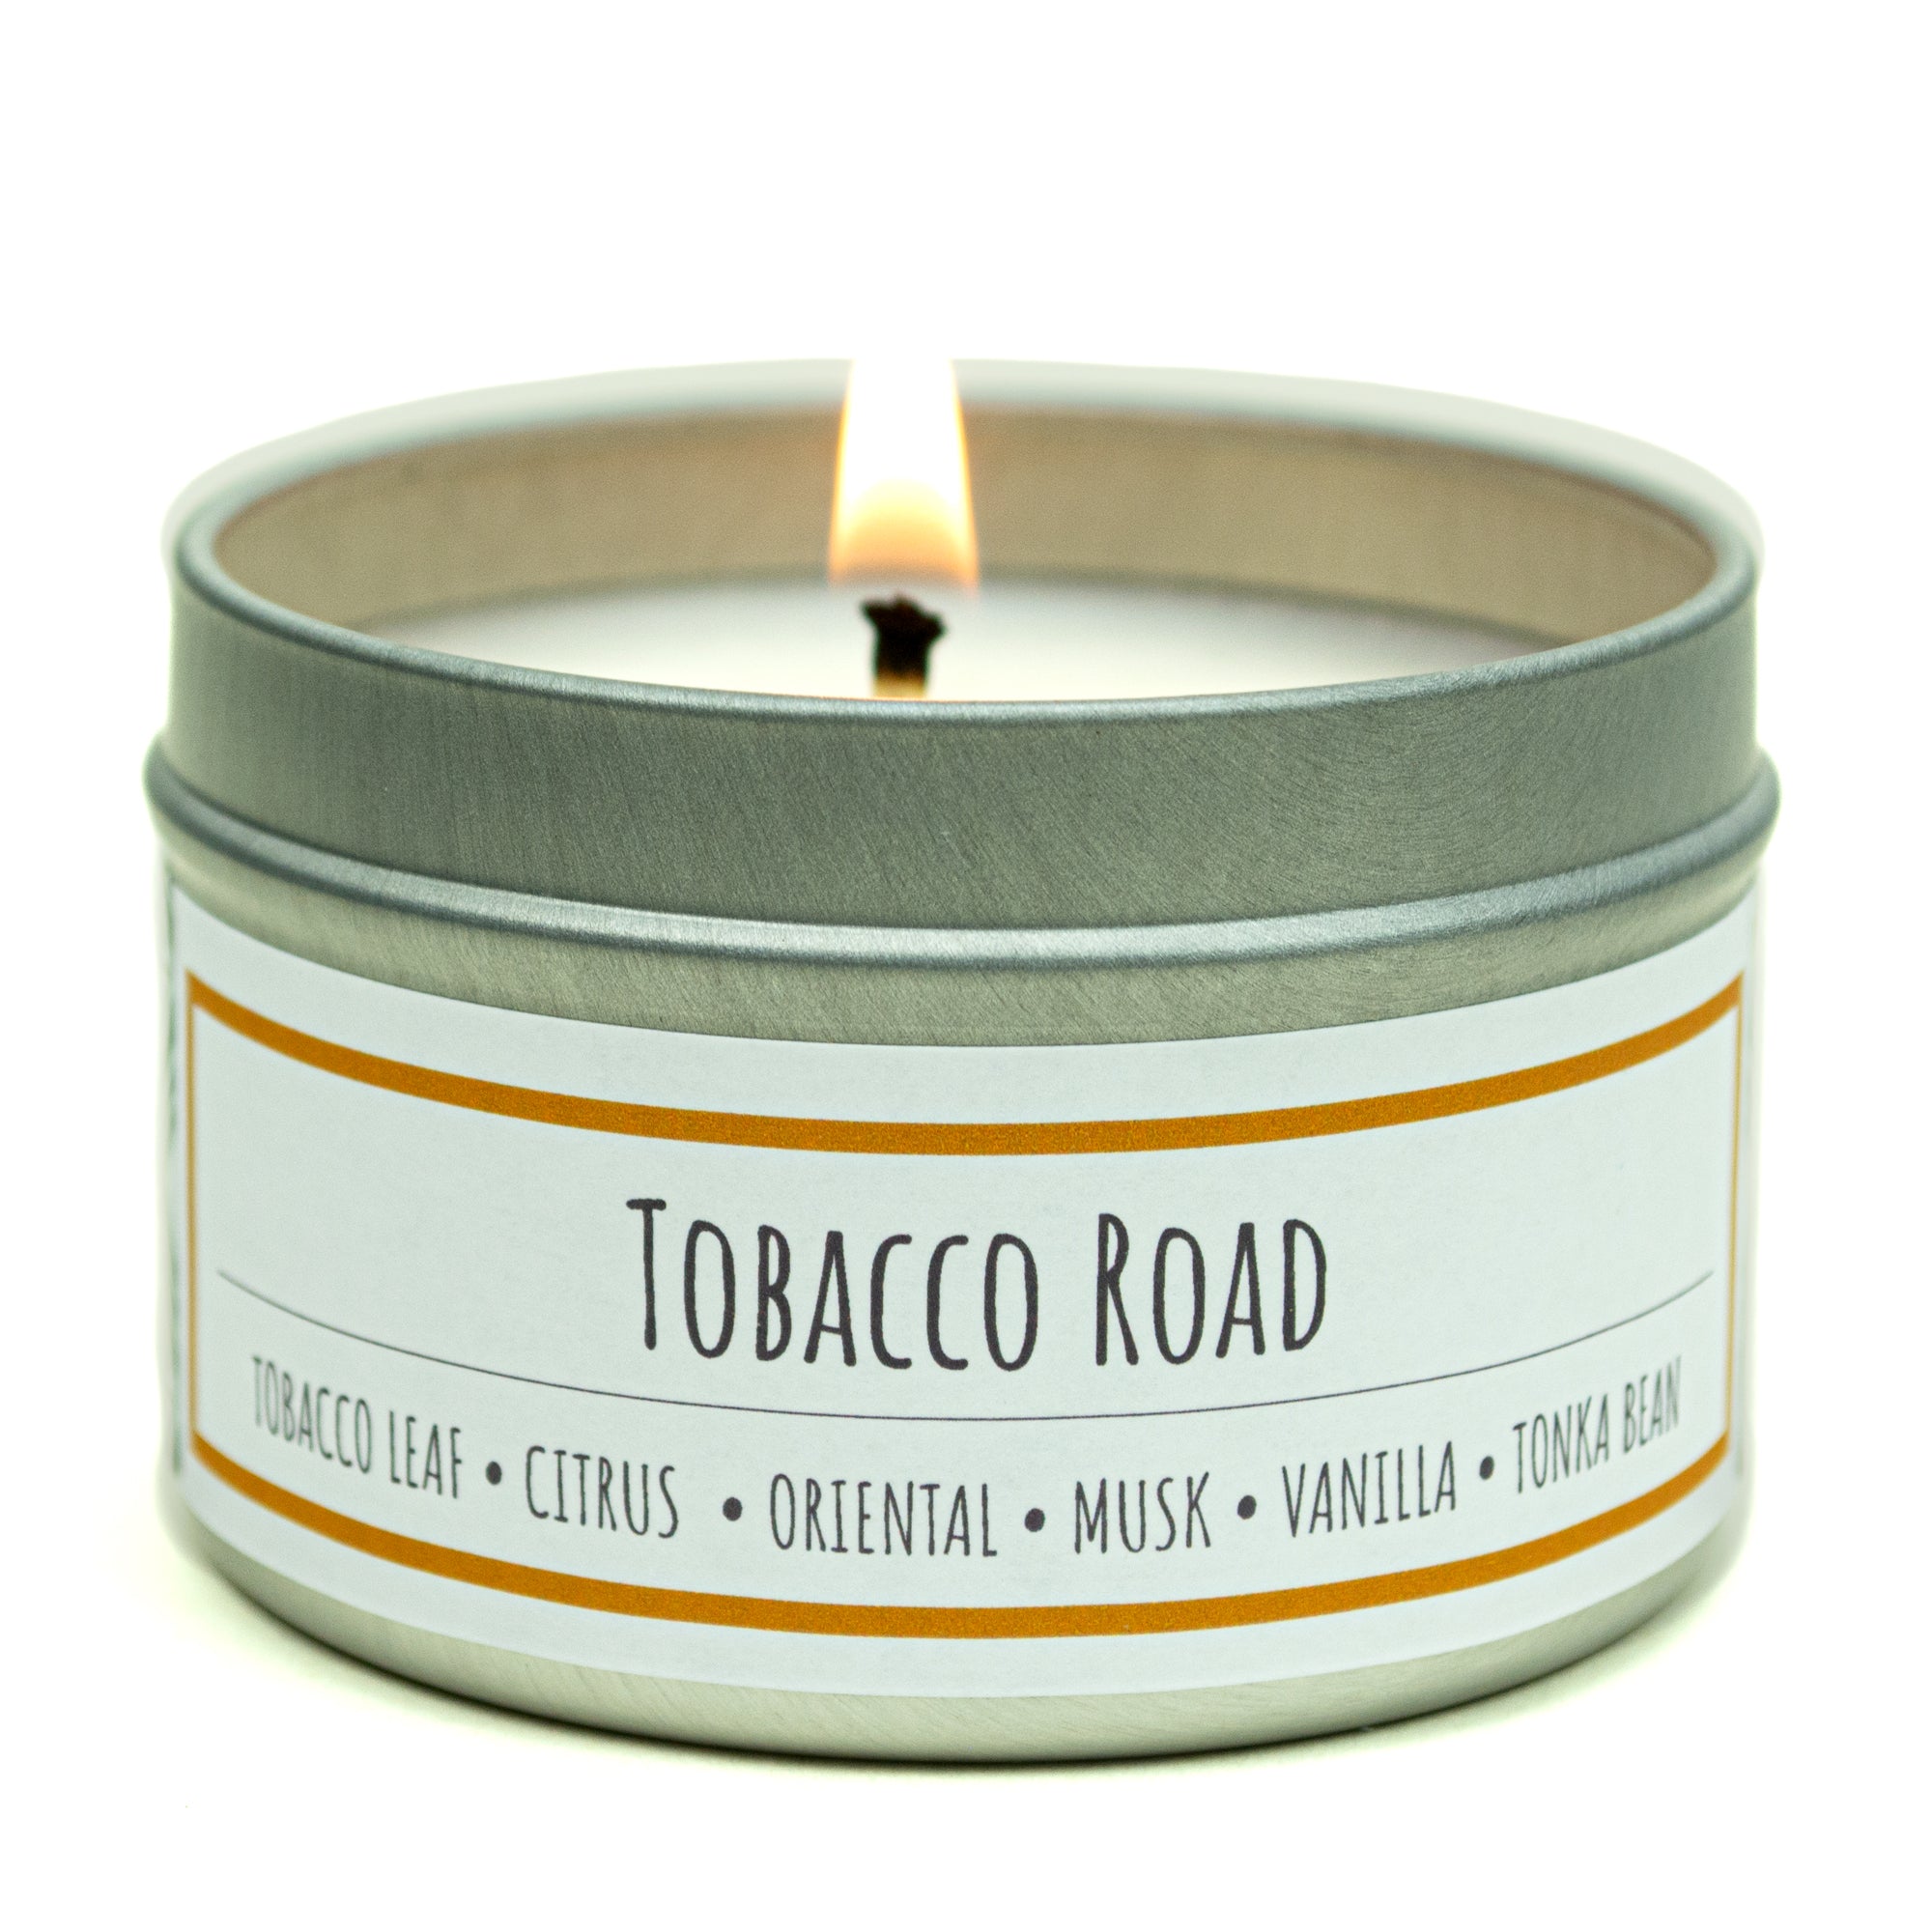 Tobacco Road scented 3 oz. soy candle in travel tin